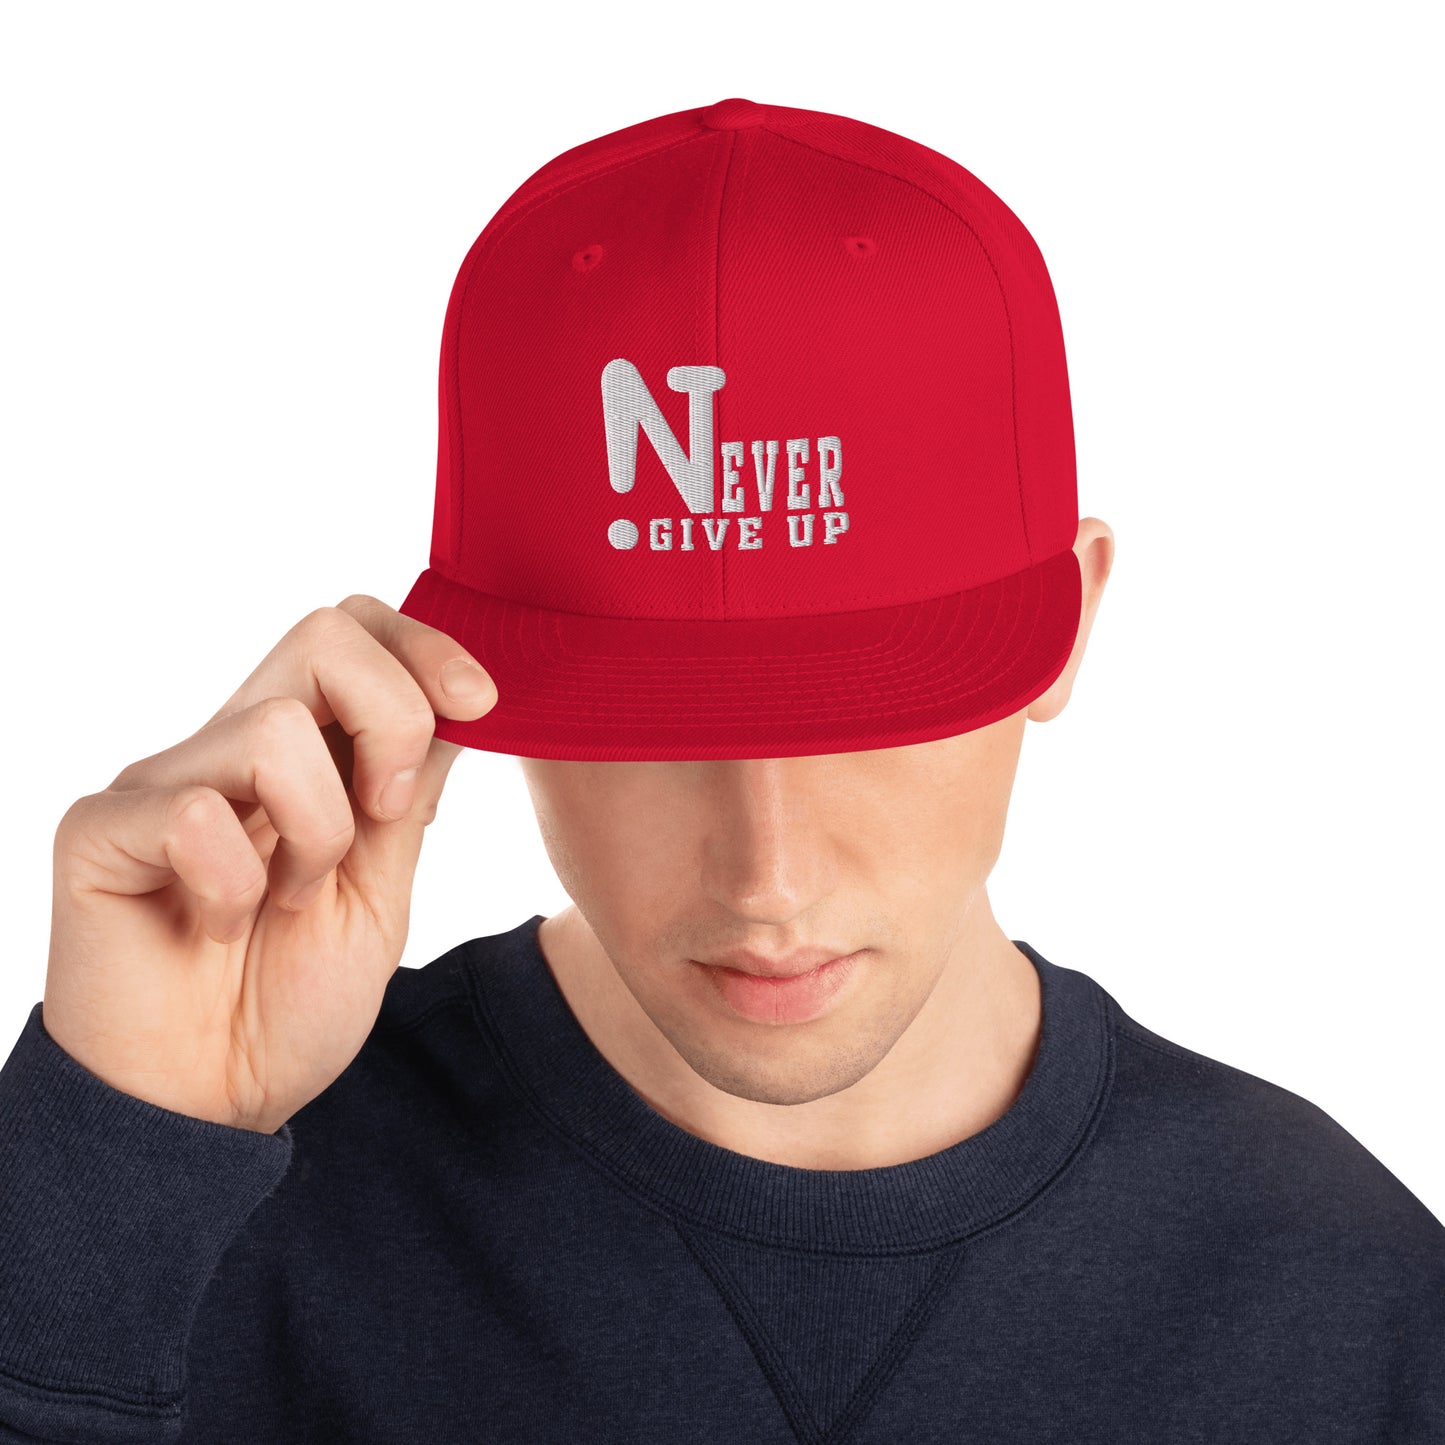 !Never Give Up Snapback Hat